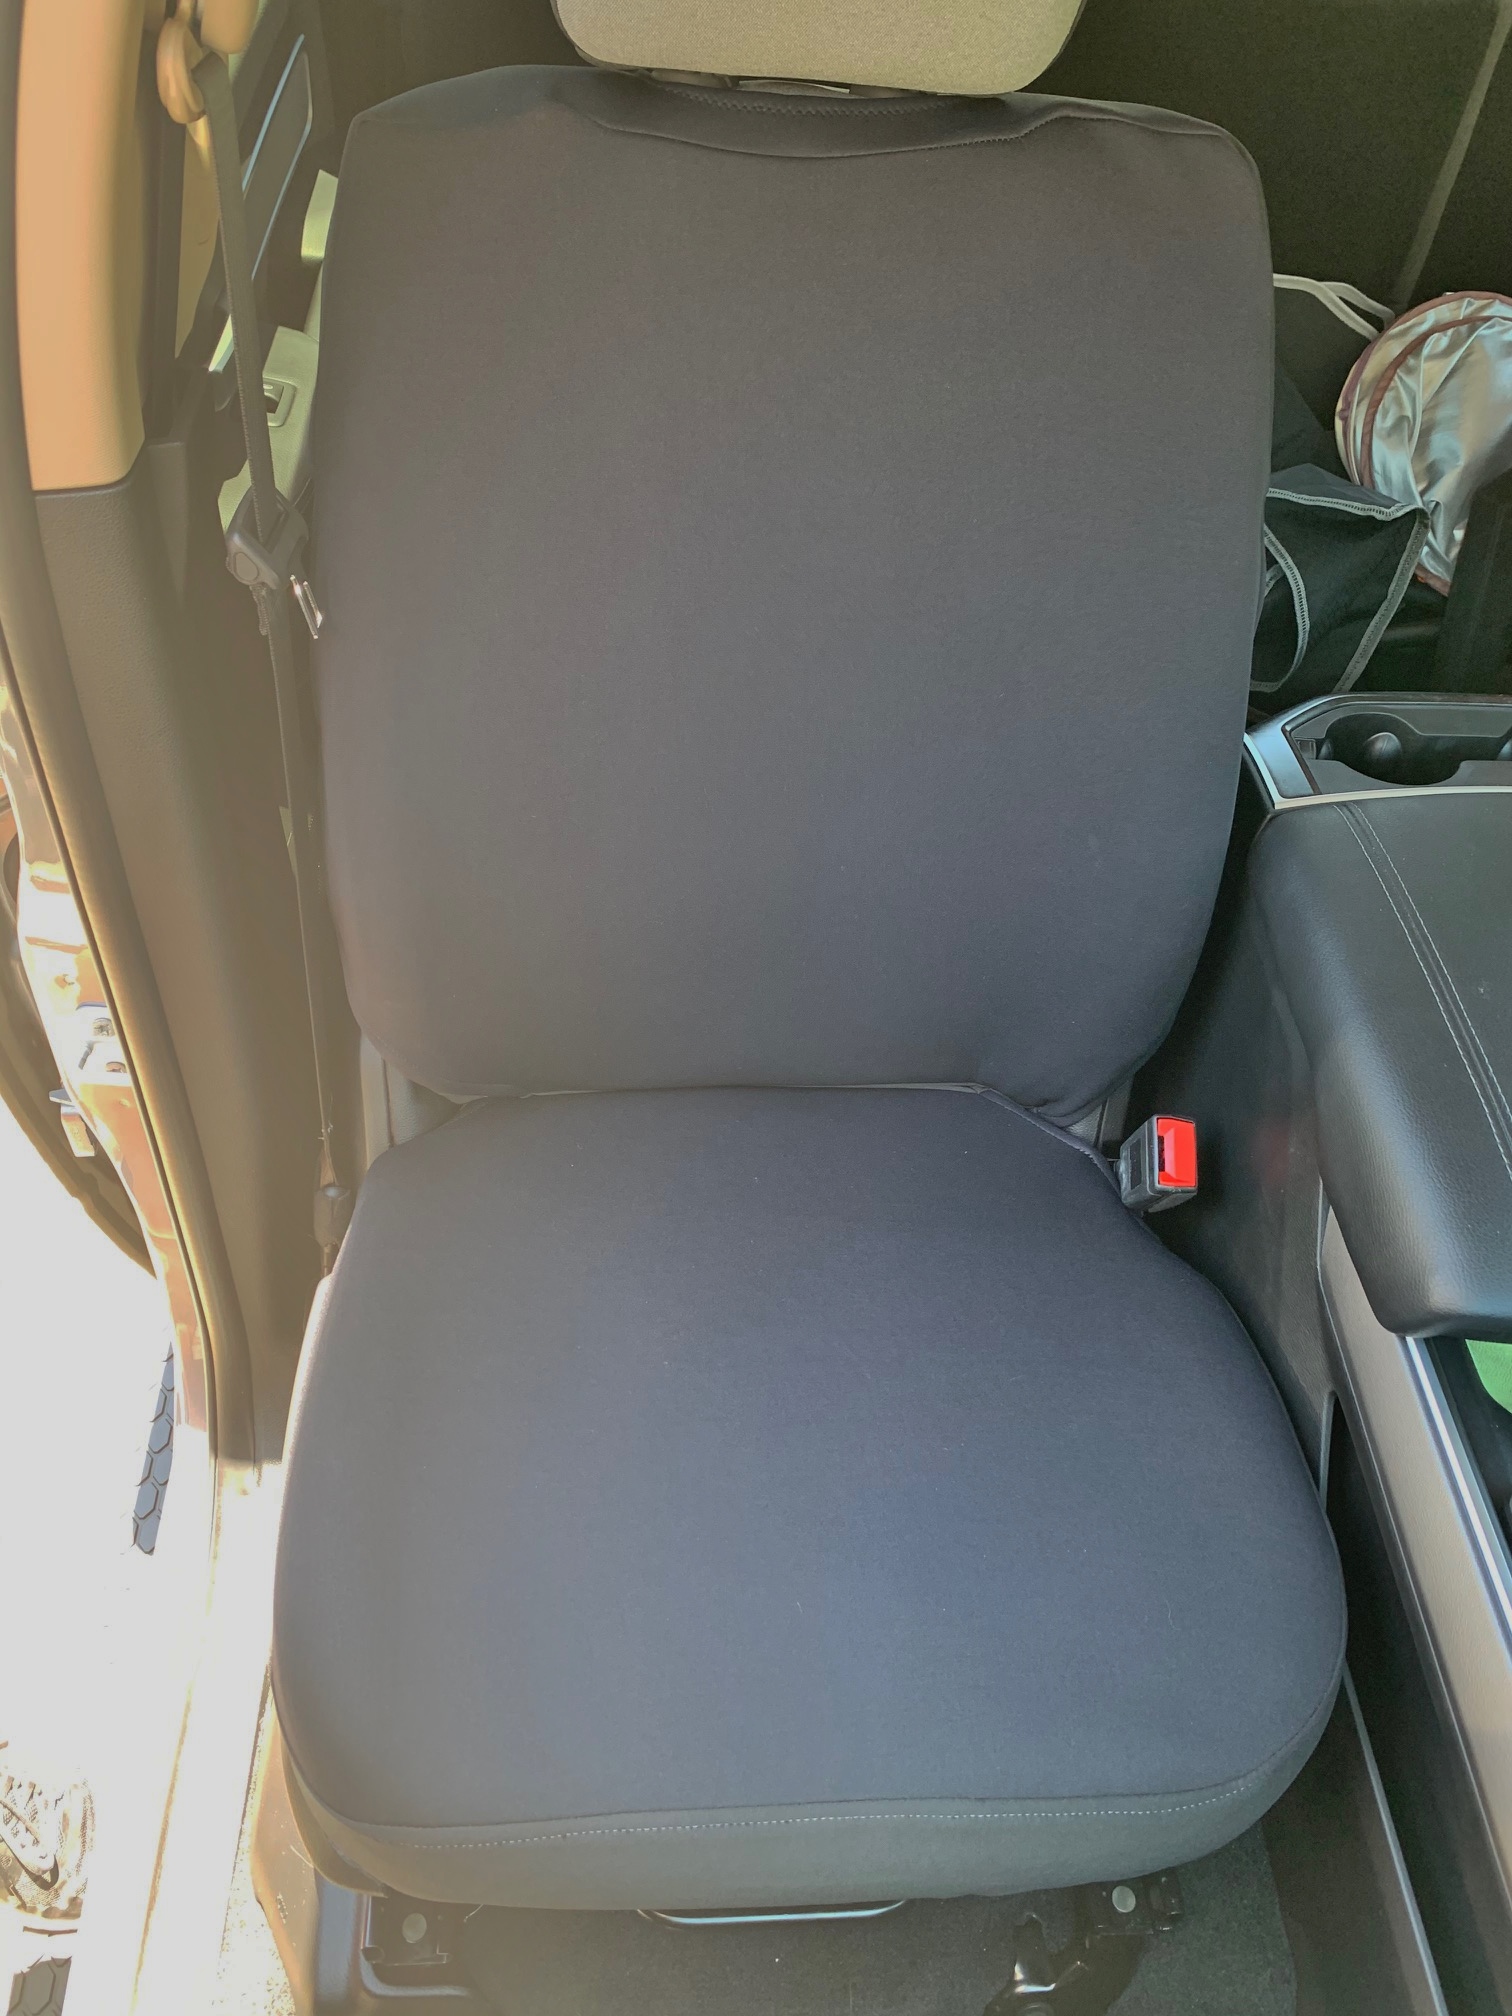 Buy Full Seat Covers for the Ram 2019-2024 All Models and Trim Levels (Pair)- Neoprene Material